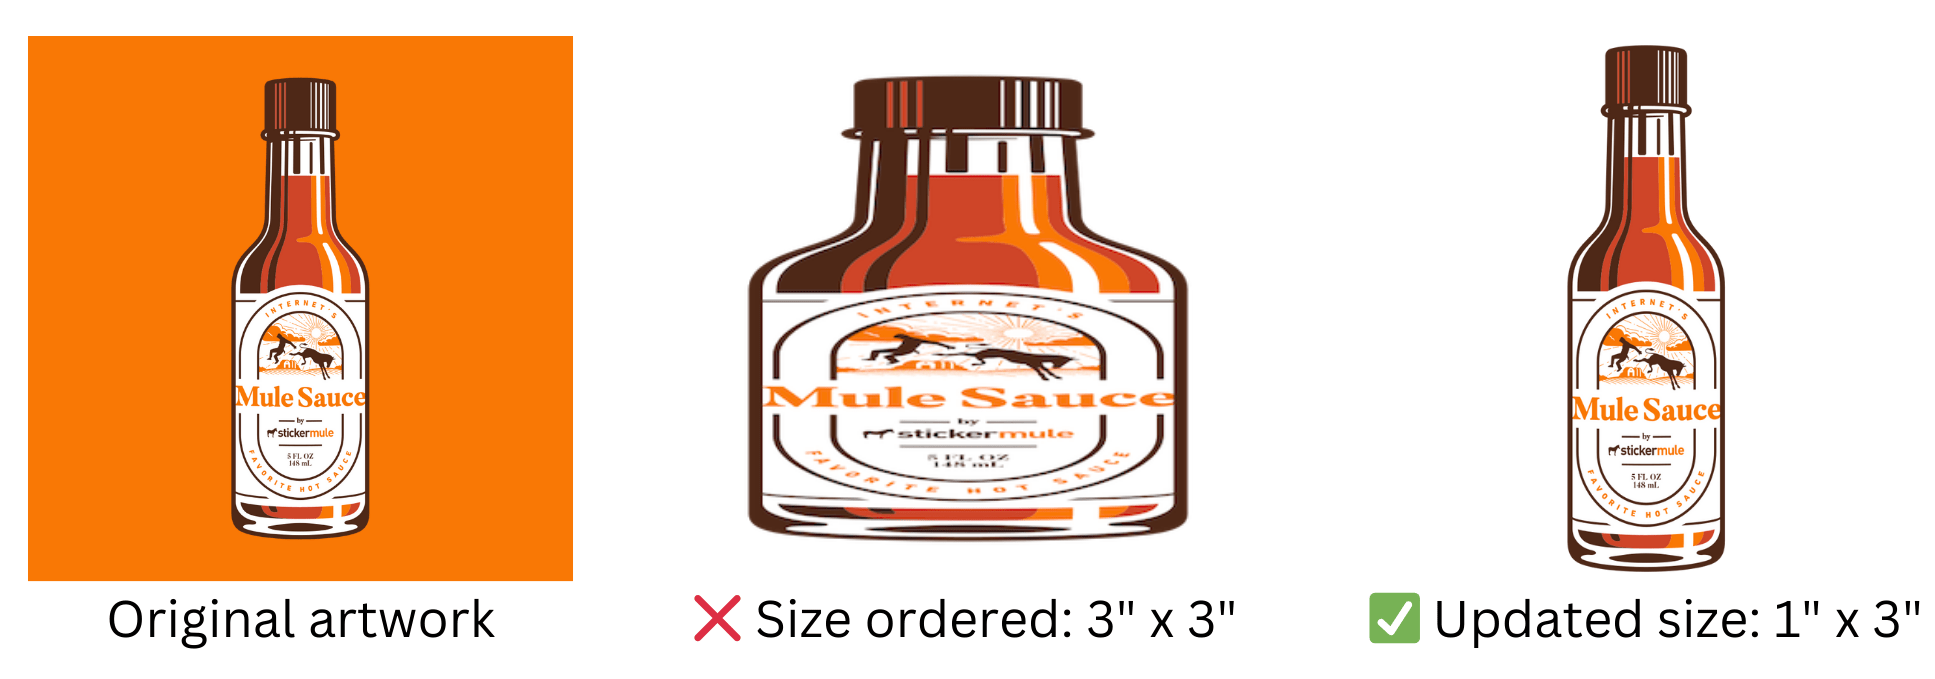 example of how artwork of mule sauce can become skewed when proofed at a disproportionate size